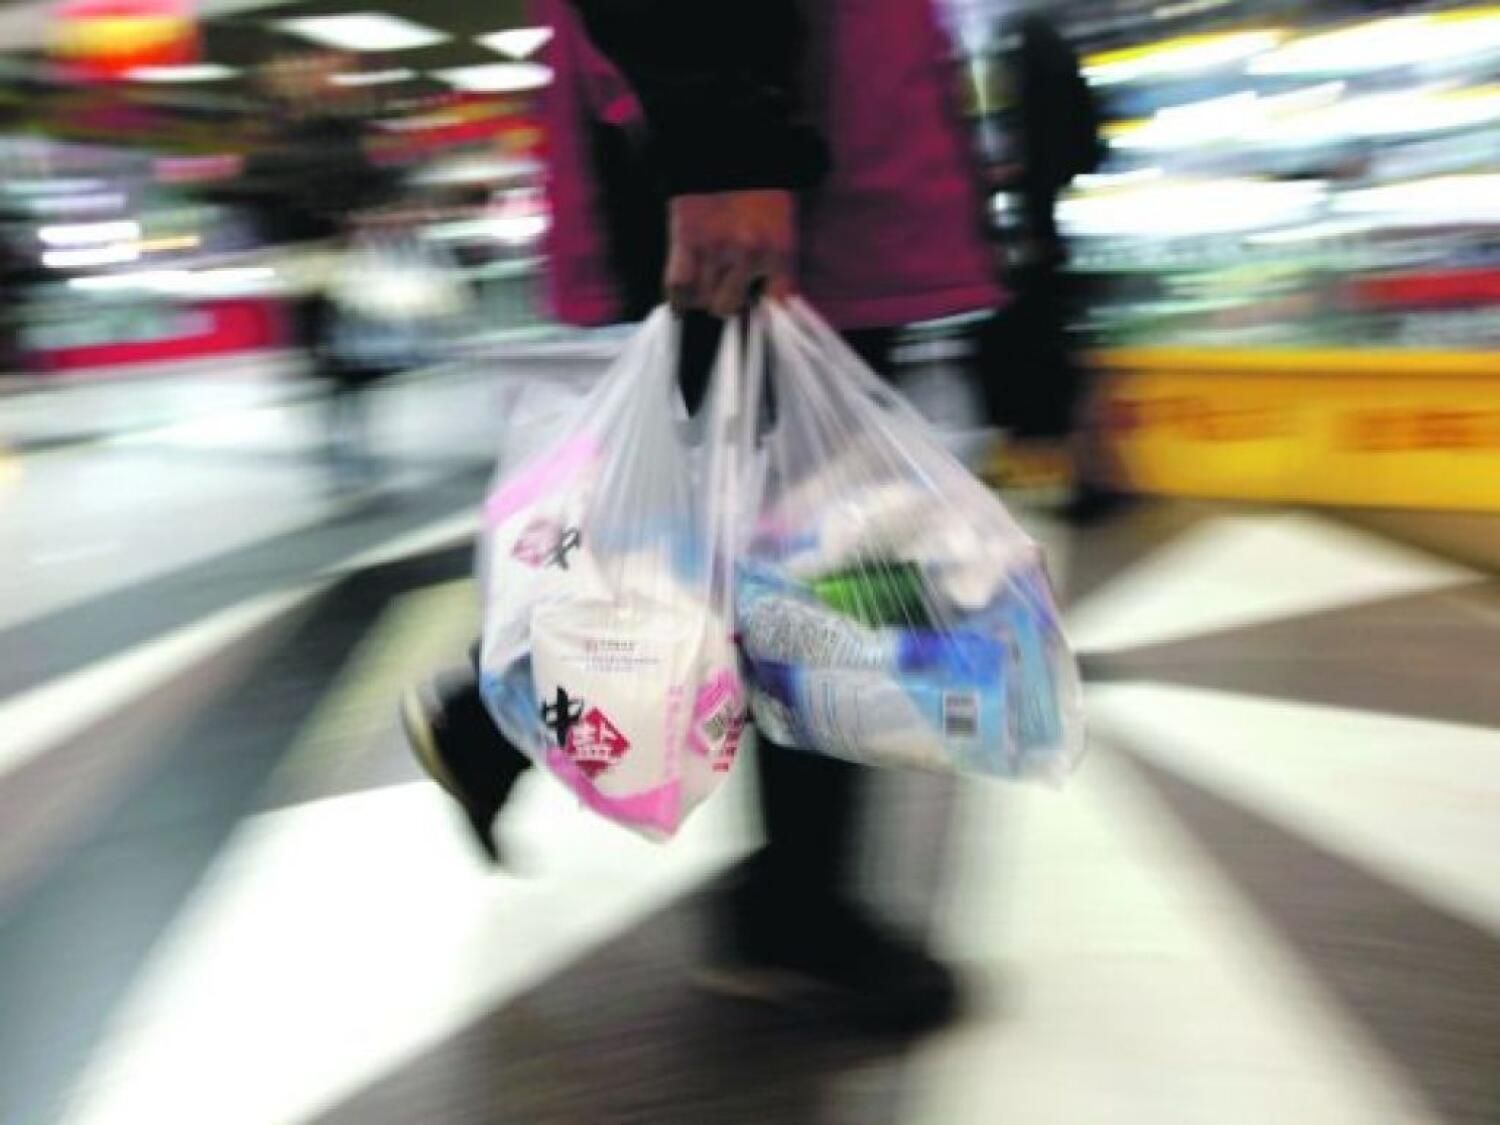 Dubai: All single-use bags to be banned from June 1; fines, exemptions revealed